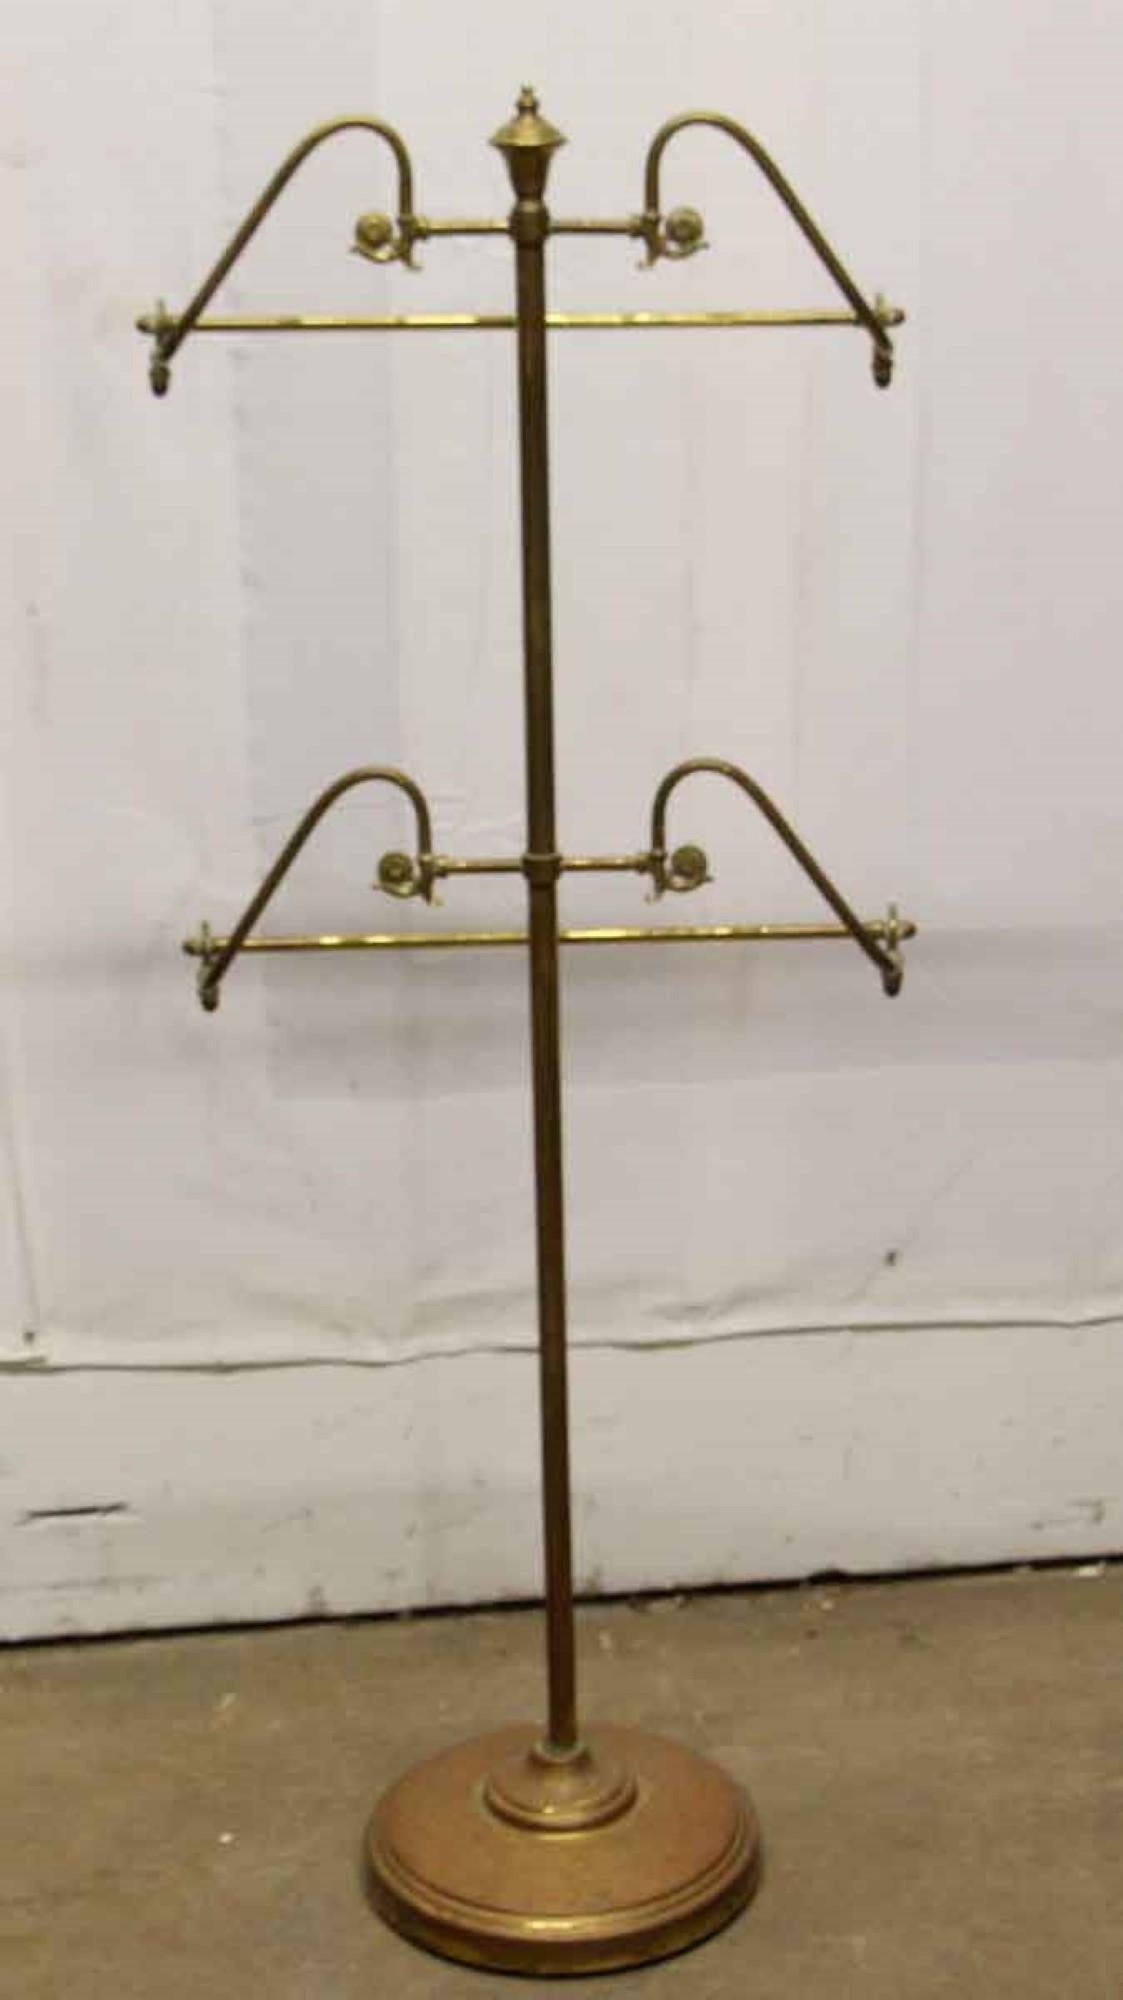 Mid-20th Century 1960s Brass Silent Butler or Valet Men's Suit Stand with 2 Racks Original Patina